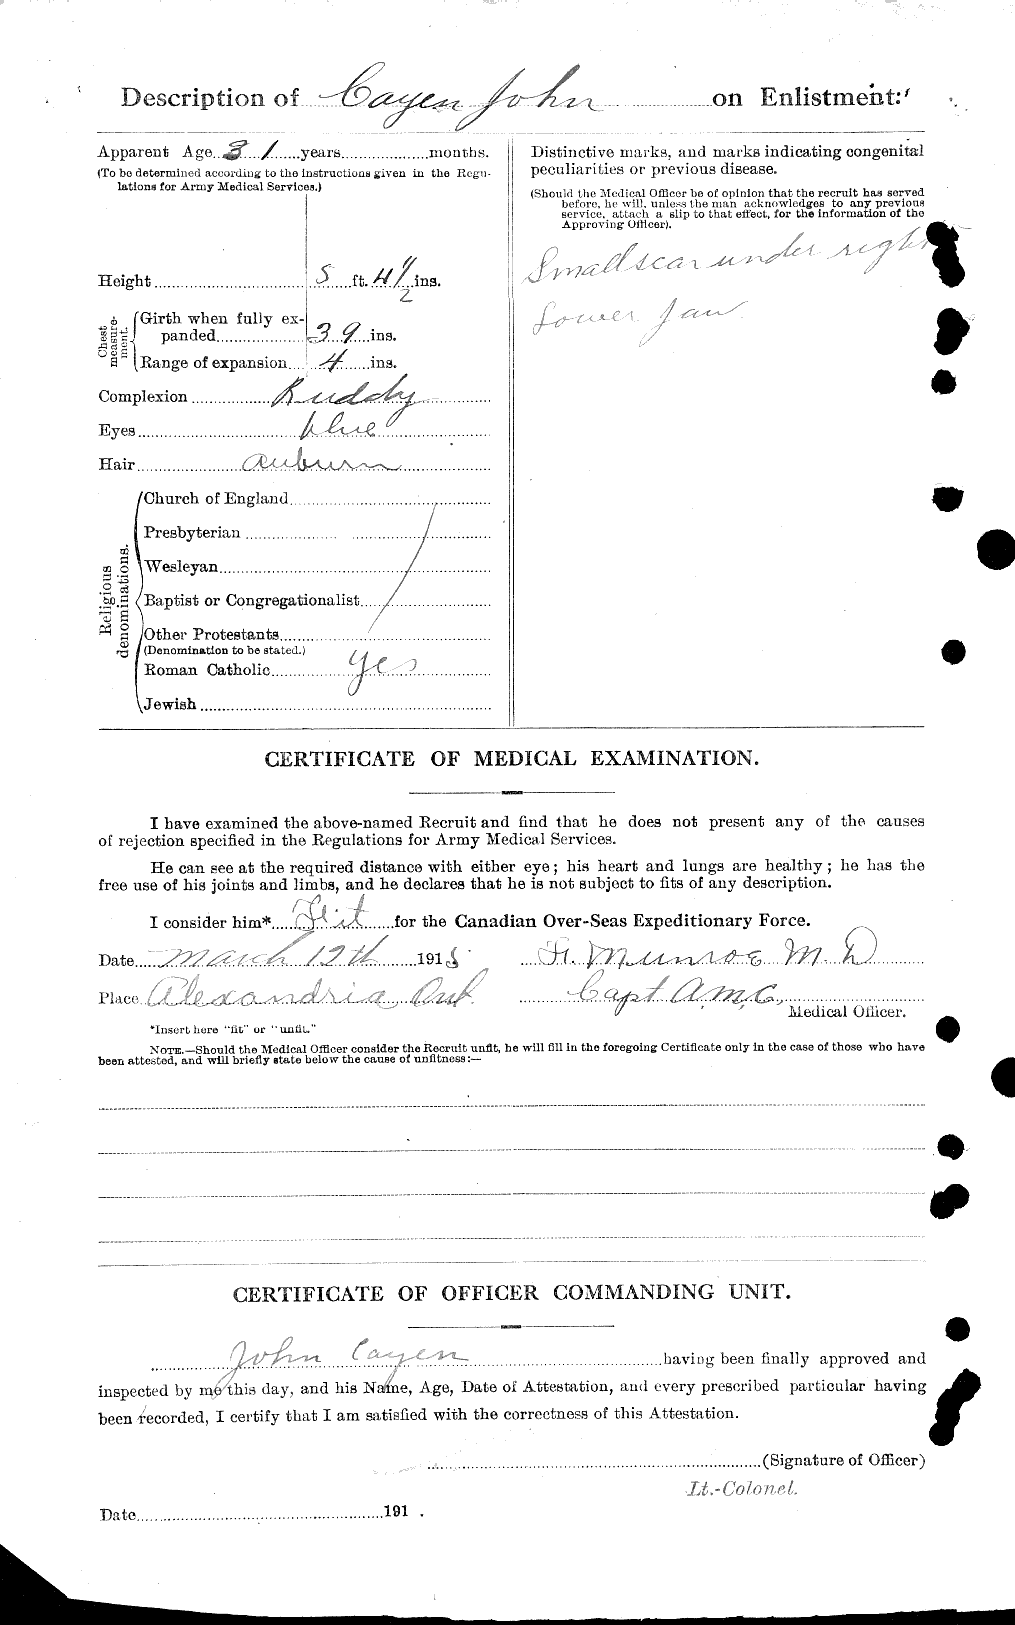 Personnel Records of the First World War - CEF 007650b